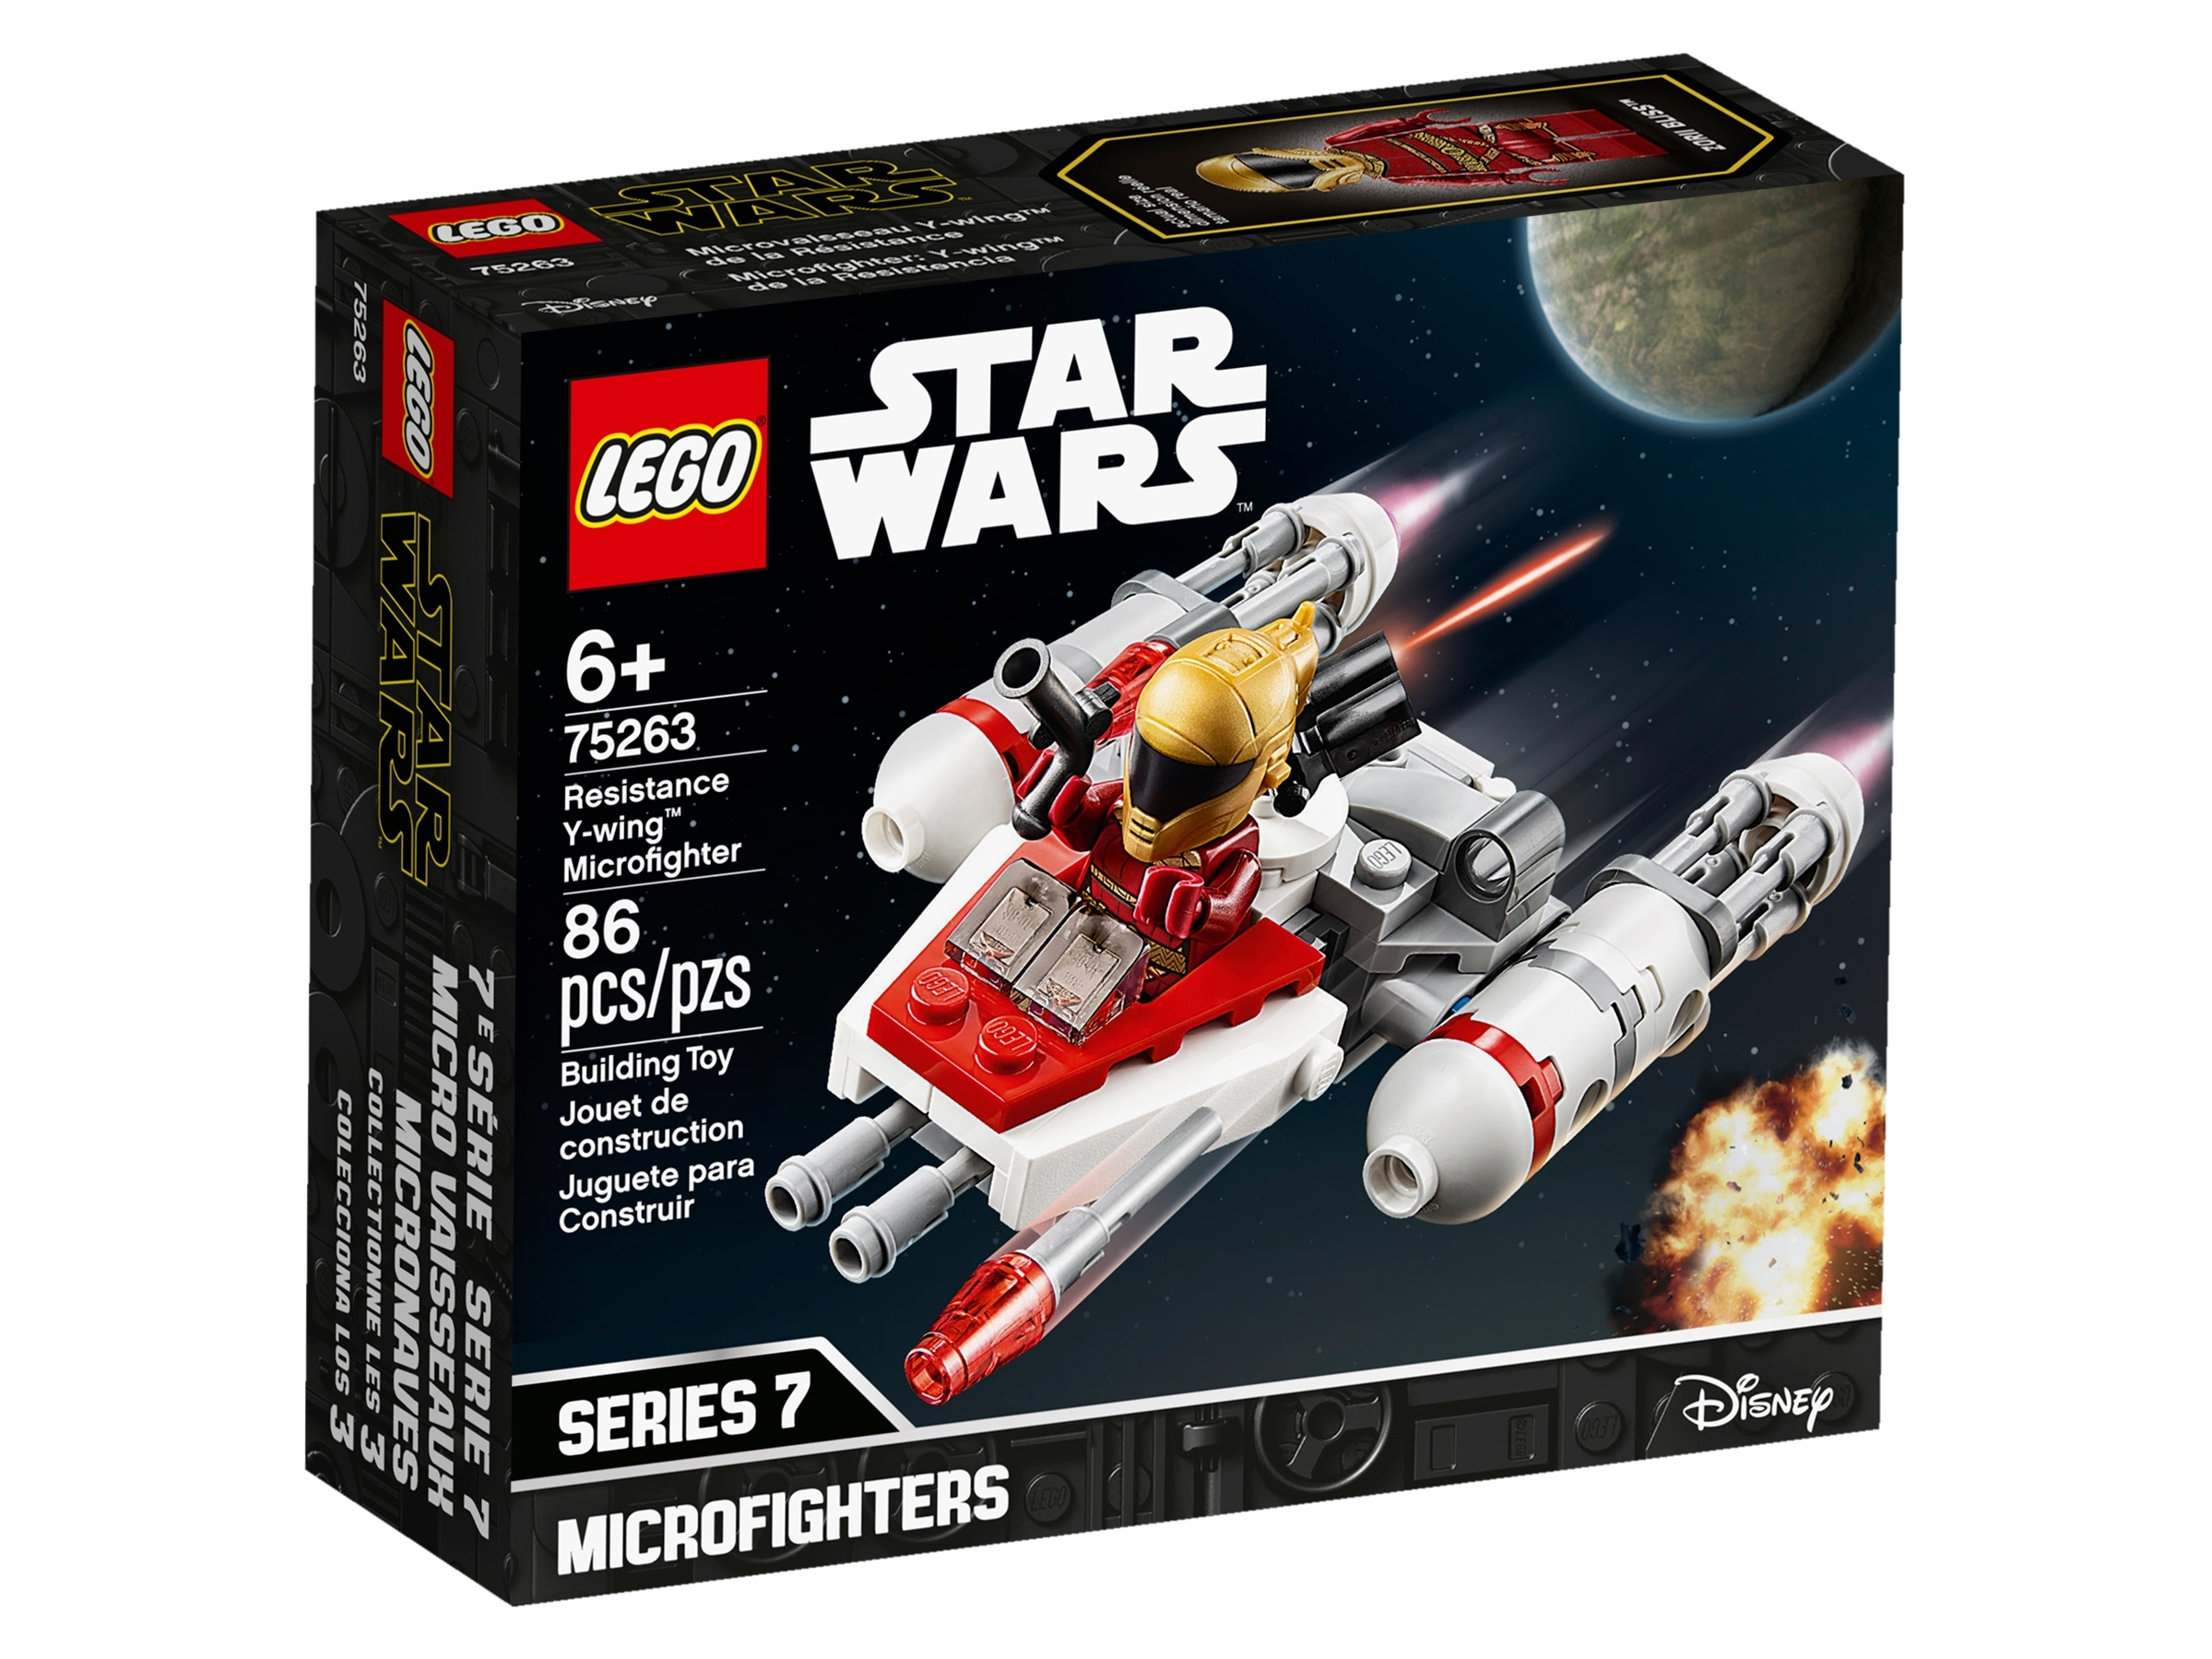 LEGO Resistance Y-wing Microfighter Star Wars TM 75263 for sale online